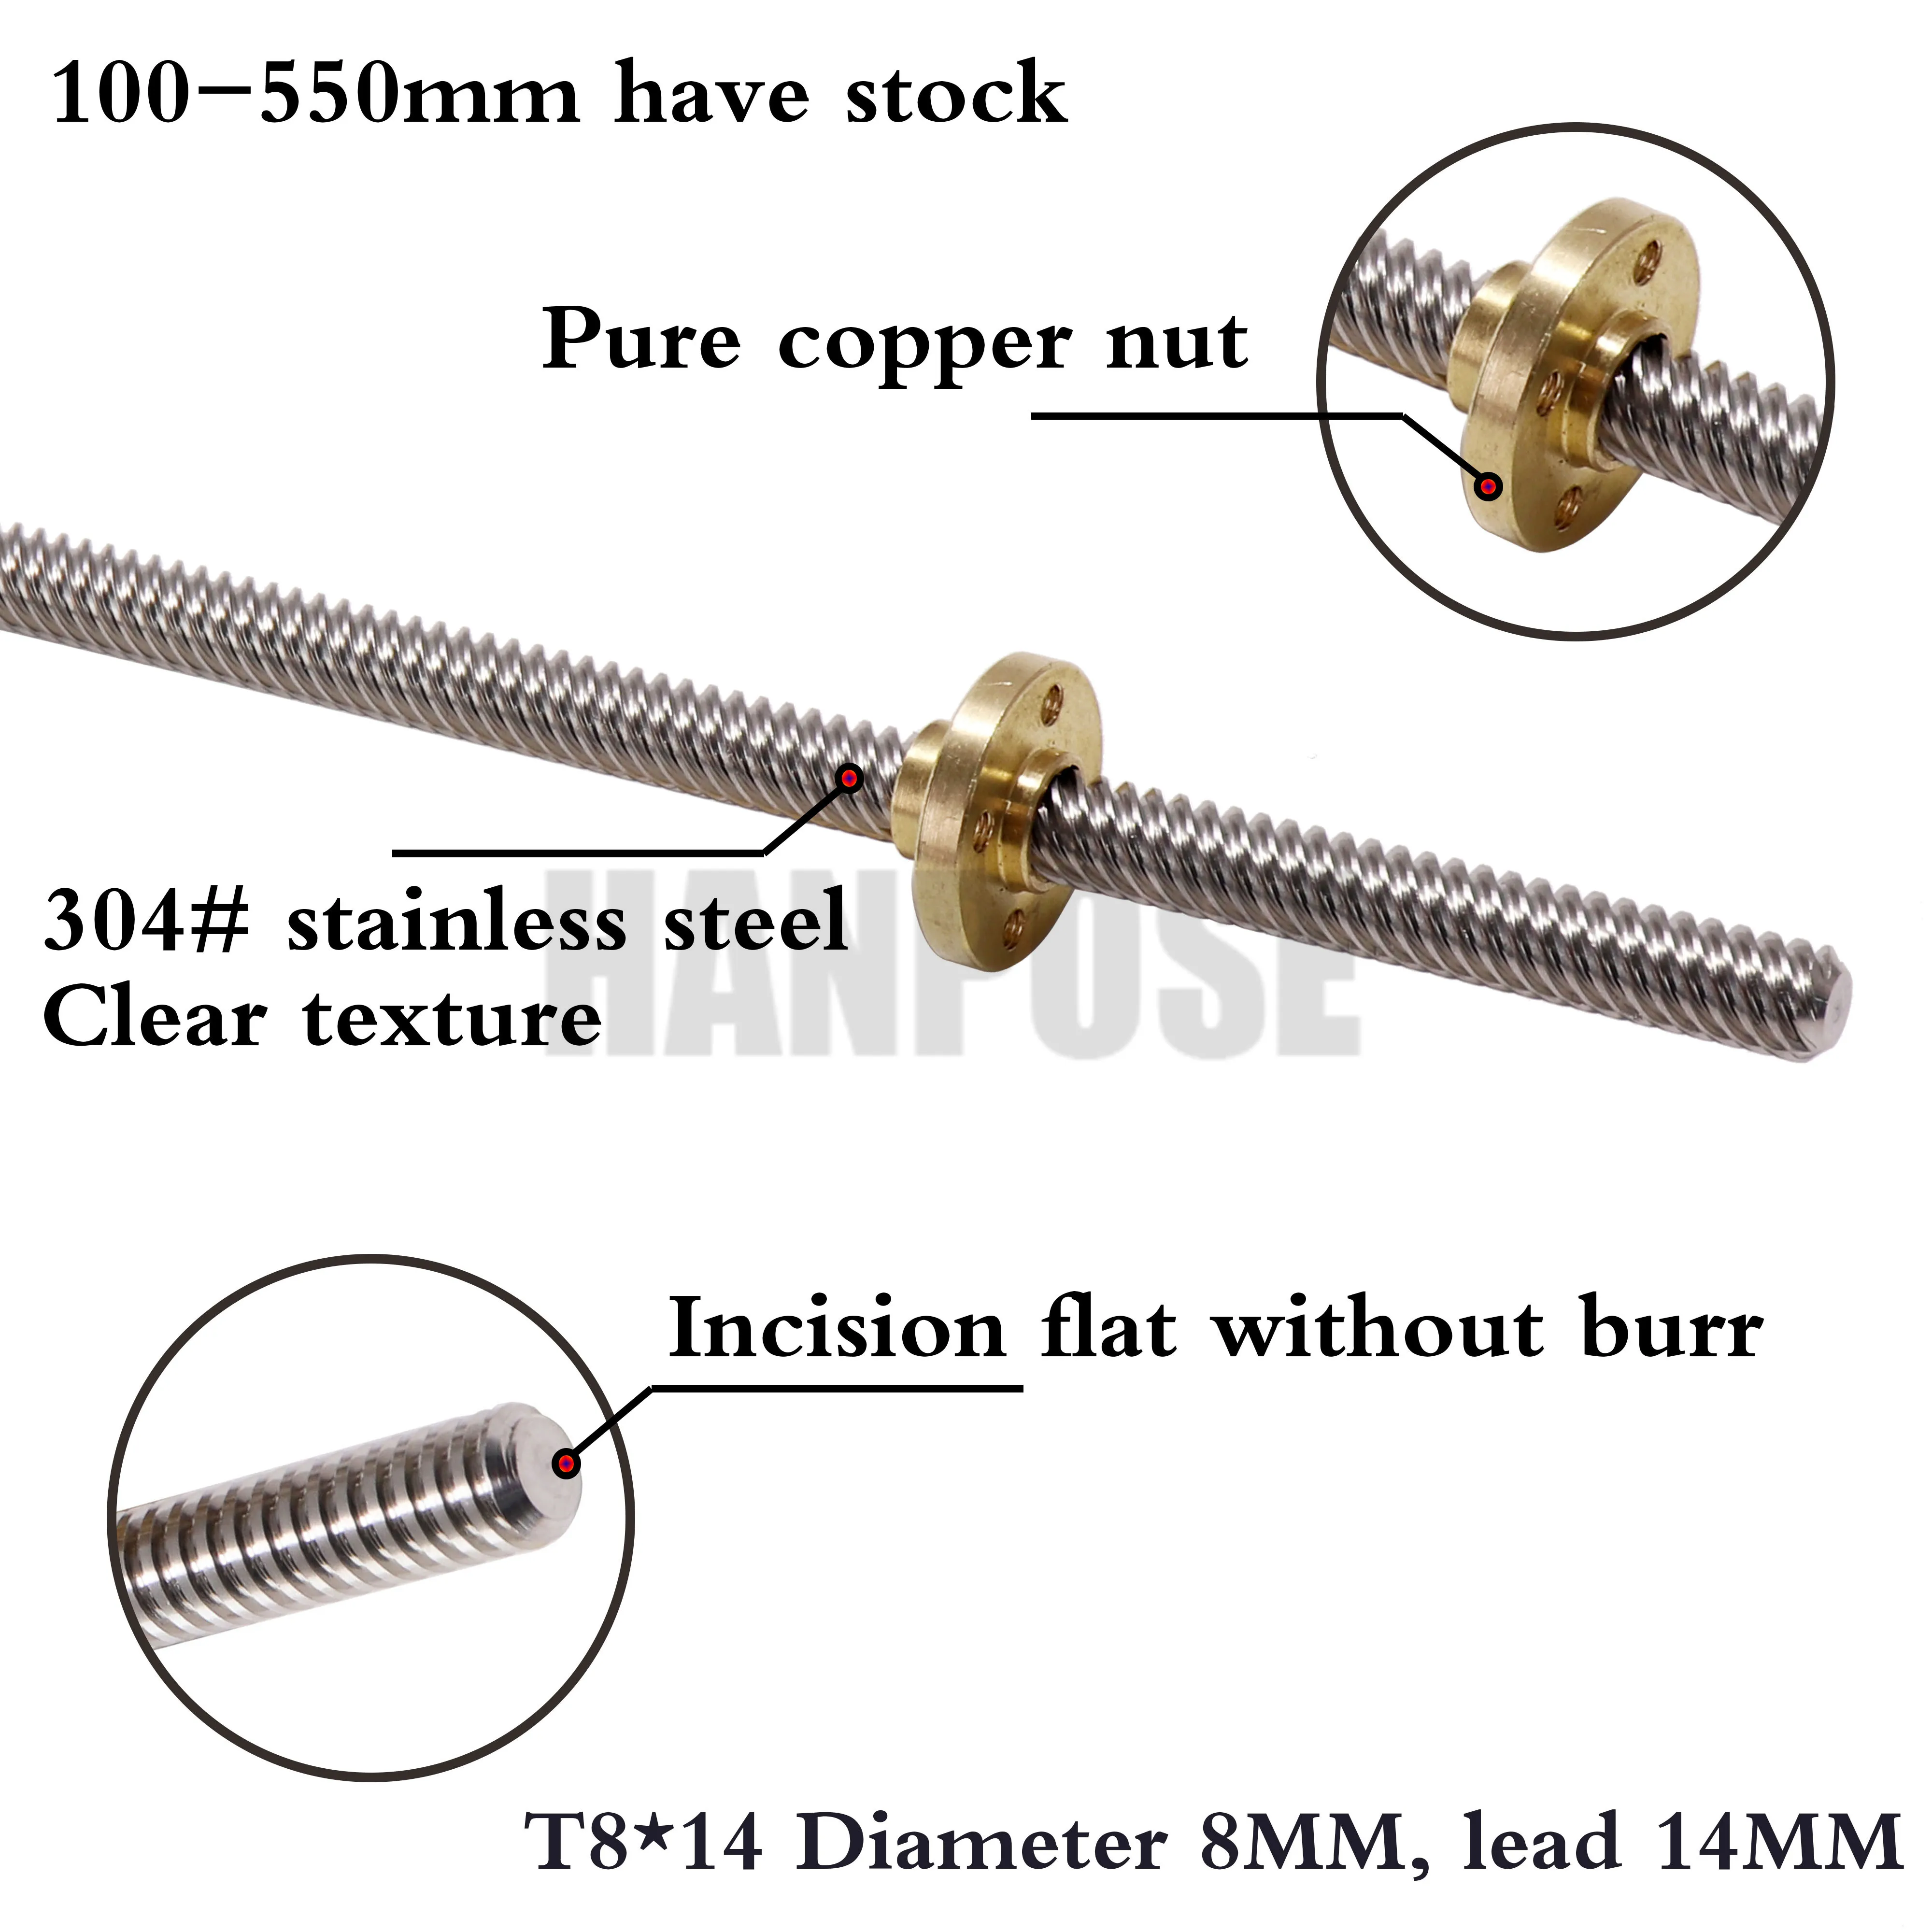 Brass Nut T8x4 Pitch 2mm Lead 4mm Trapezoidal Rod Stainless Lead Screw 